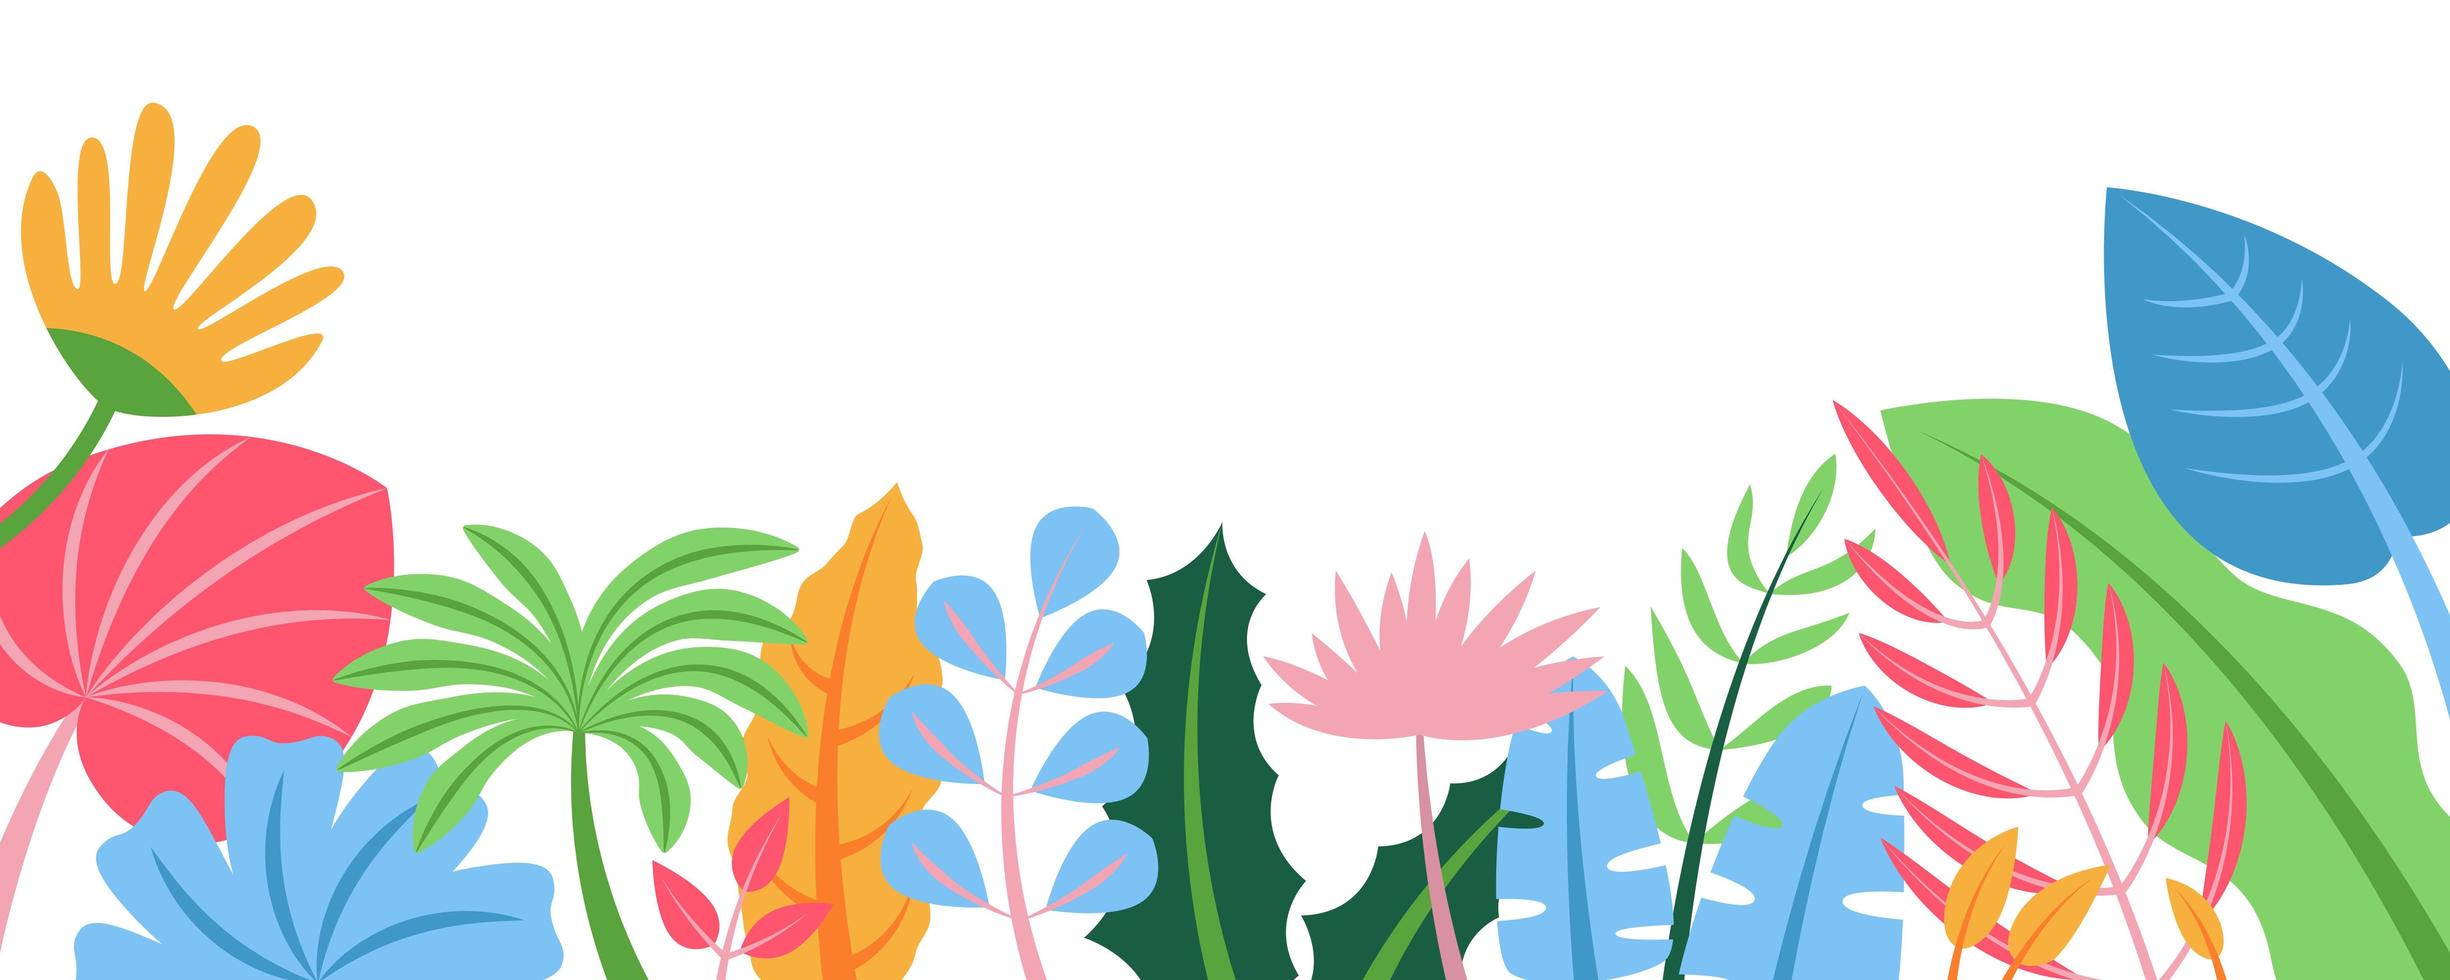 Summer nature background with floral pattern vector